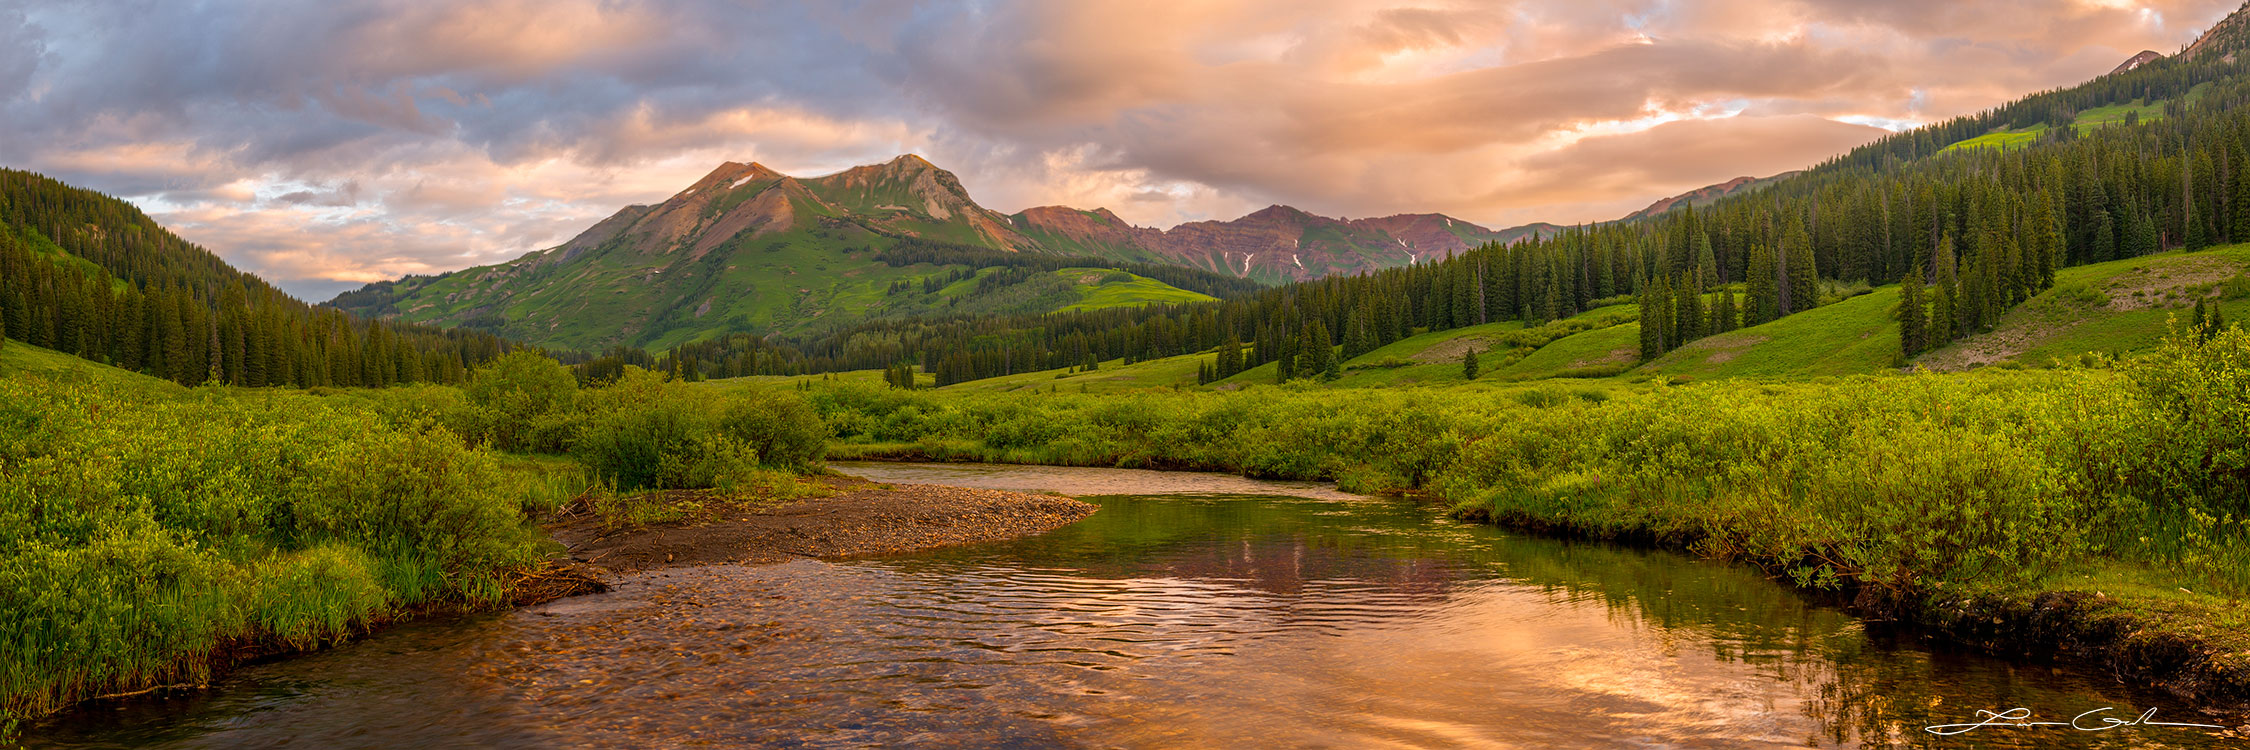 A mountain river in a beautiful green valley with pine trees and pretty mountains during sunrise